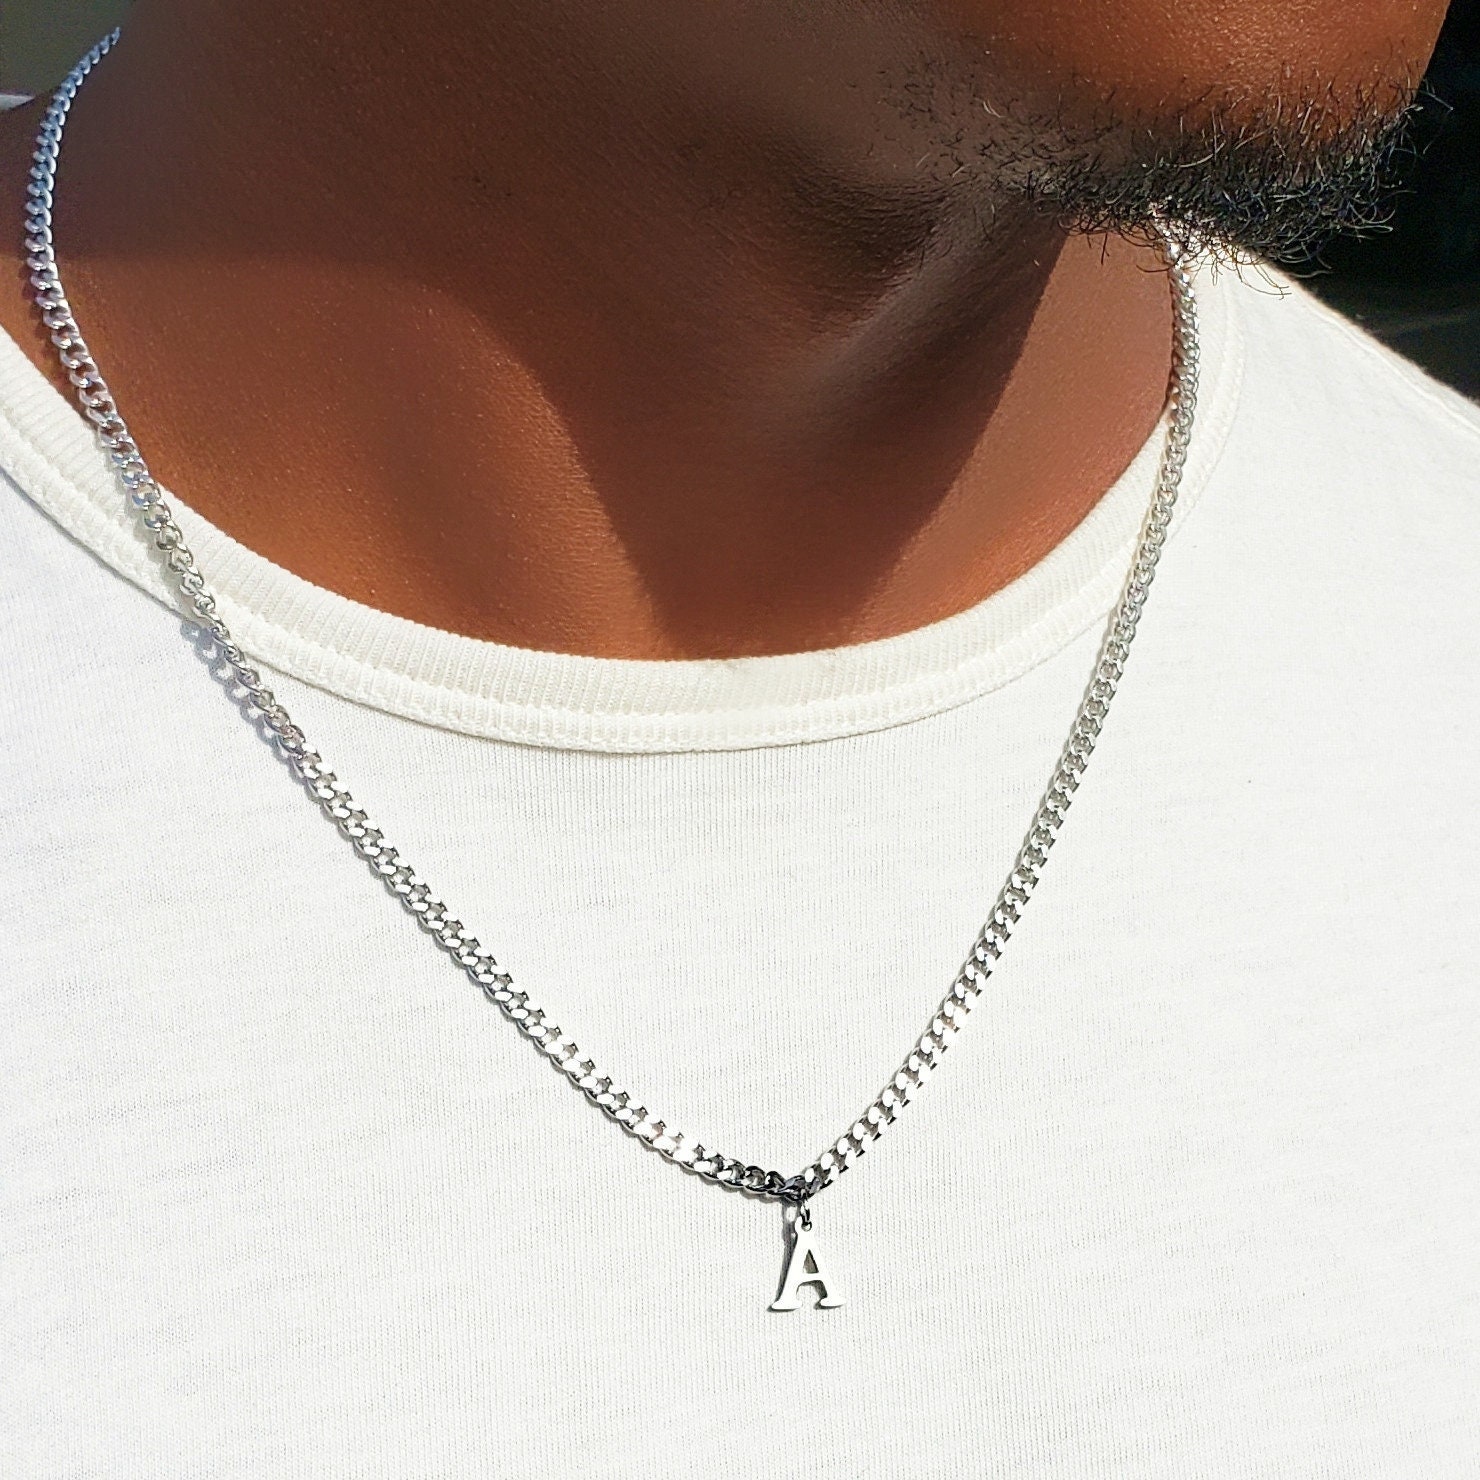 Men's Black Chain Necklace - 2.5mm Box Chain Necklace - Waterproof Chain - Stainless Steel Chain - Black Jewelry - Necklace by Modern Out